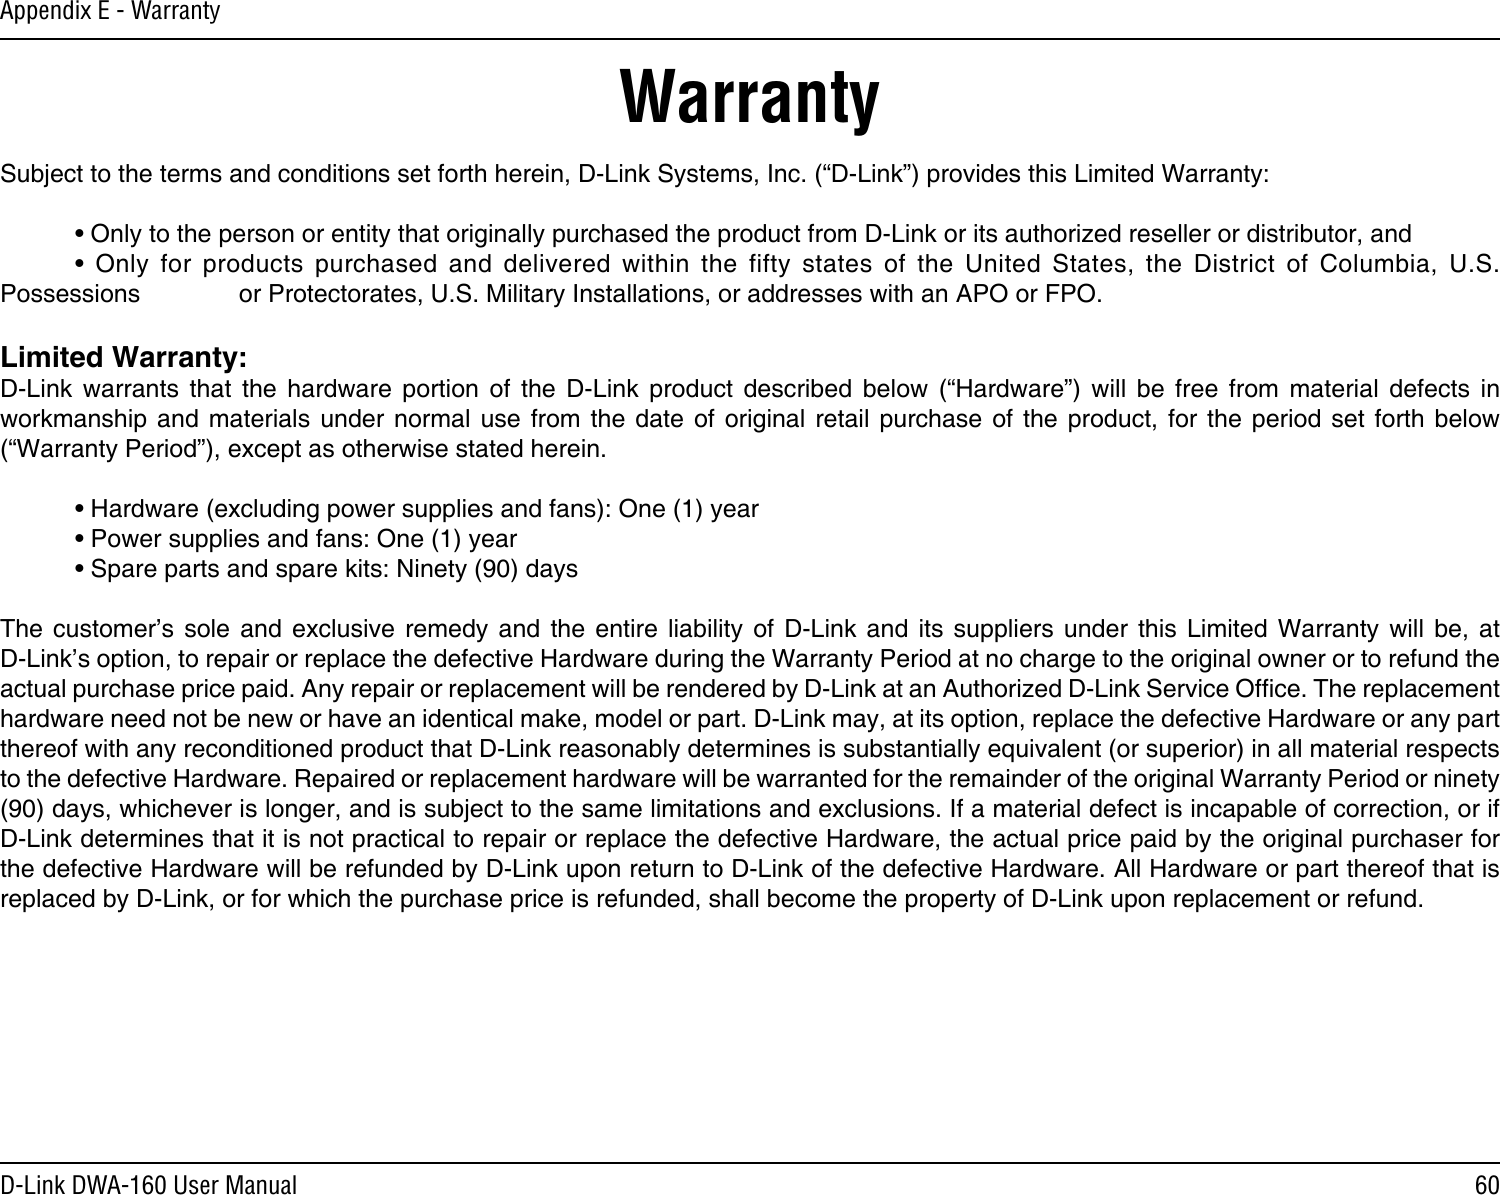 60D-Link DWA-160 User ManualAppendix E - WarrantyWarrantySubject to the terms and conditions set forth herein, D-Link Systems, Inc. (“D-Link”) provides this Limited Warranty:  • Only to the person or entity that originally purchased the product from D-Link or its authorized reseller or distributor, and  •  Only  for  products  purchased  and  delivered  within  the  fifty  states  of  the  United  States,  the  District  of  Columbia,  U.S. Possessions      or Protectorates, U.S. Military Installations, or addresses with an APO or FPO.Limited Warranty:D-Link  warrants  that  the  hardware  portion  of  the  D-Link  product  described  below  (“Hardware”)  will  be  free  from  material  defects  in workmanship  and  materials under  normal use  from the  date  of original  retail purchase  of the  product, for  the  period set  forth below (“Warranty Period”), except as otherwise stated herein.  • Hardware (excluding power supplies and fans): One (1) year  • Power supplies and fans: One (1) year  • Spare parts and spare kits: Ninety (90) daysThe  customer’s sole  and  exclusive remedy  and  the  entire  liability  of  D-Link  and  its  suppliers  under  this  Limited  Warranty  will  be,  at  D-Link’s option, to repair or replace the defective Hardware during the Warranty Period at no charge to the original owner or to refund the actual purchase price paid. Any repair or replacement will be rendered by D-Link at an Authorized D-Link Service Ofce. The replacement hardware need not be new or have an identical make, model or part. D-Link may, at its option, replace the defective Hardware or any part thereof with any reconditioned product that D-Link reasonably determines is substantially equivalent (or superior) in all material respects to the defective Hardware. Repaired or replacement hardware will be warranted for the remainder of the original Warranty Period or ninety (90) days, whichever is longer, and is subject to the same limitations and exclusions. If a material defect is incapable of correction, or if D-Link determines that it is not practical to repair or replace the defective Hardware, the actual price paid by the original purchaser for the defective Hardware will be refunded by D-Link upon return to D-Link of the defective Hardware. All Hardware or part thereof that is replaced by D-Link, or for which the purchase price is refunded, shall become the property of D-Link upon replacement or refund.